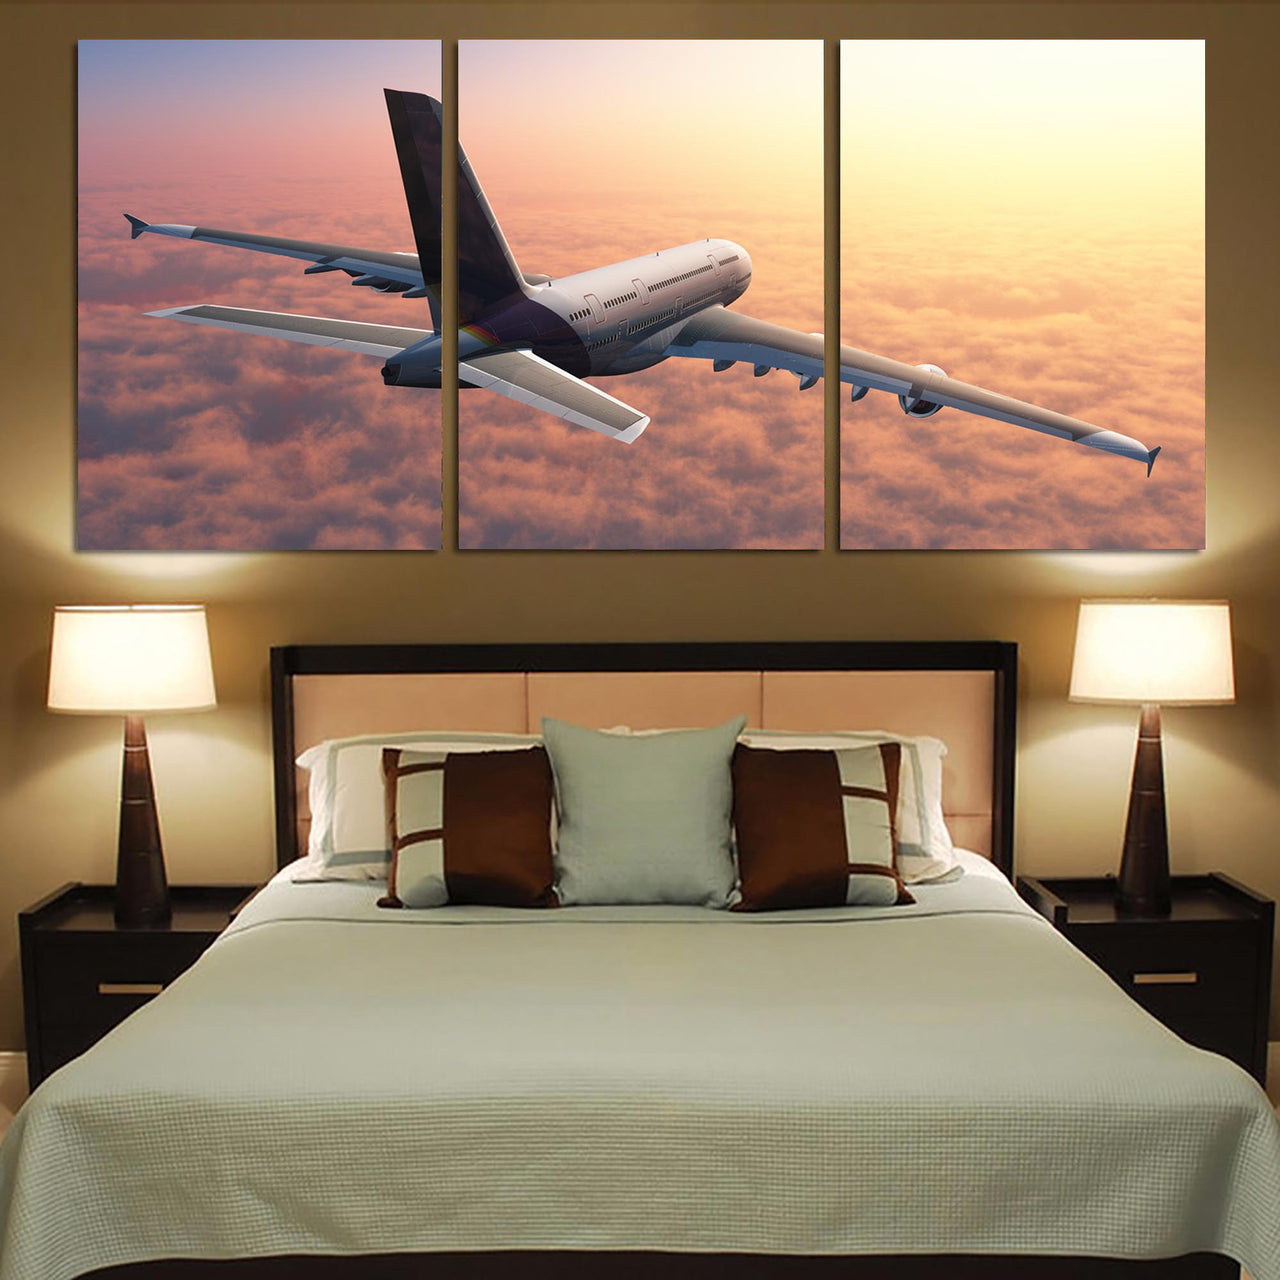 Super Cruising Airbus A380 over Clouds Printed Canvas Posters (3 Pieces)